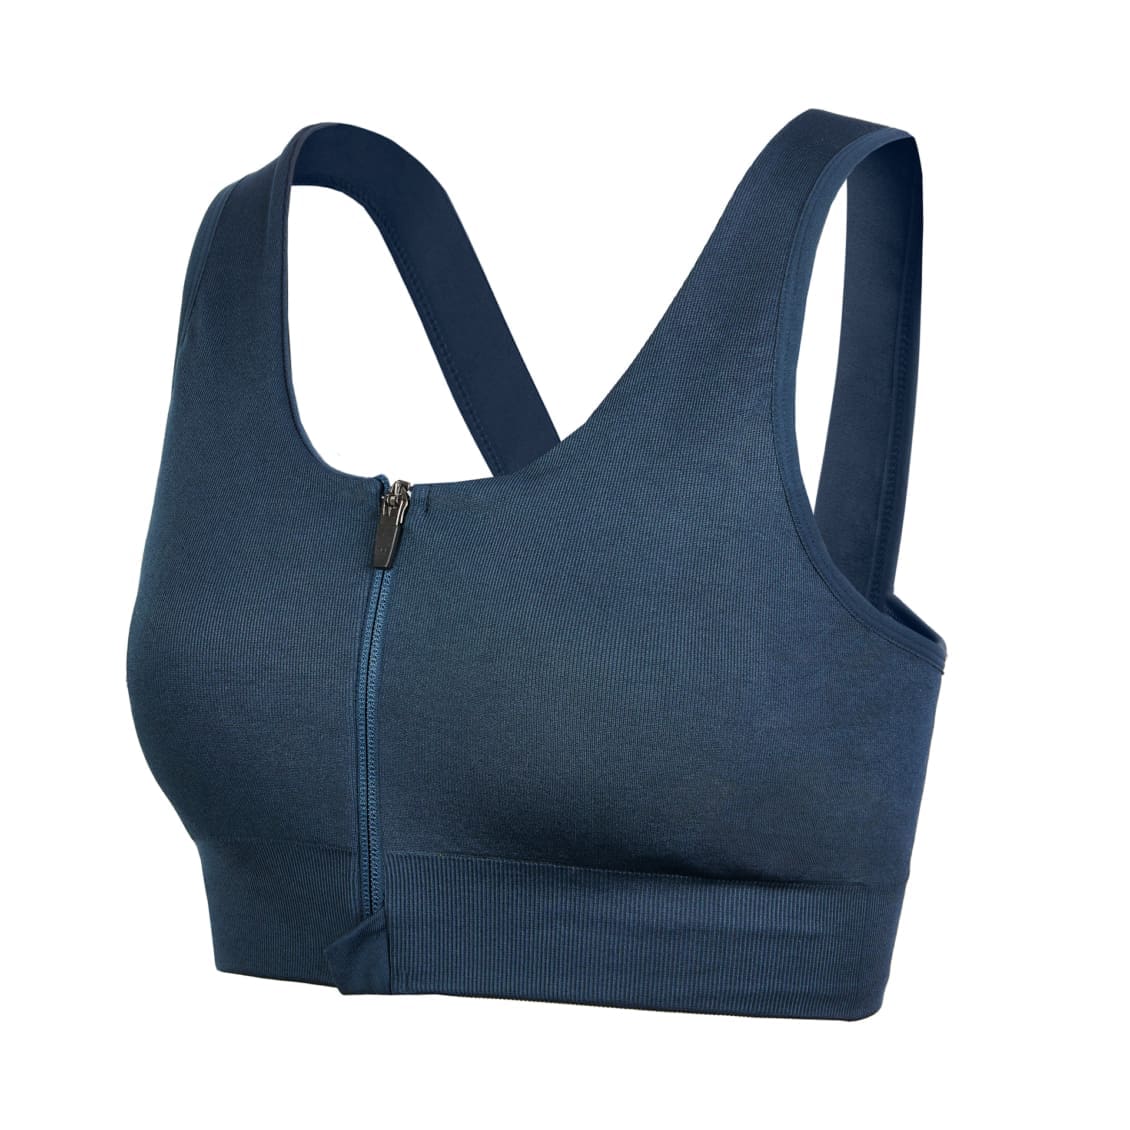 Womens Front Zip Sports Bra Tank Top For Outdoor Gym, Yoga, Running Stylish  Underwear For Running And Lingerie Drop Ship Available From Haofugui, $2.88